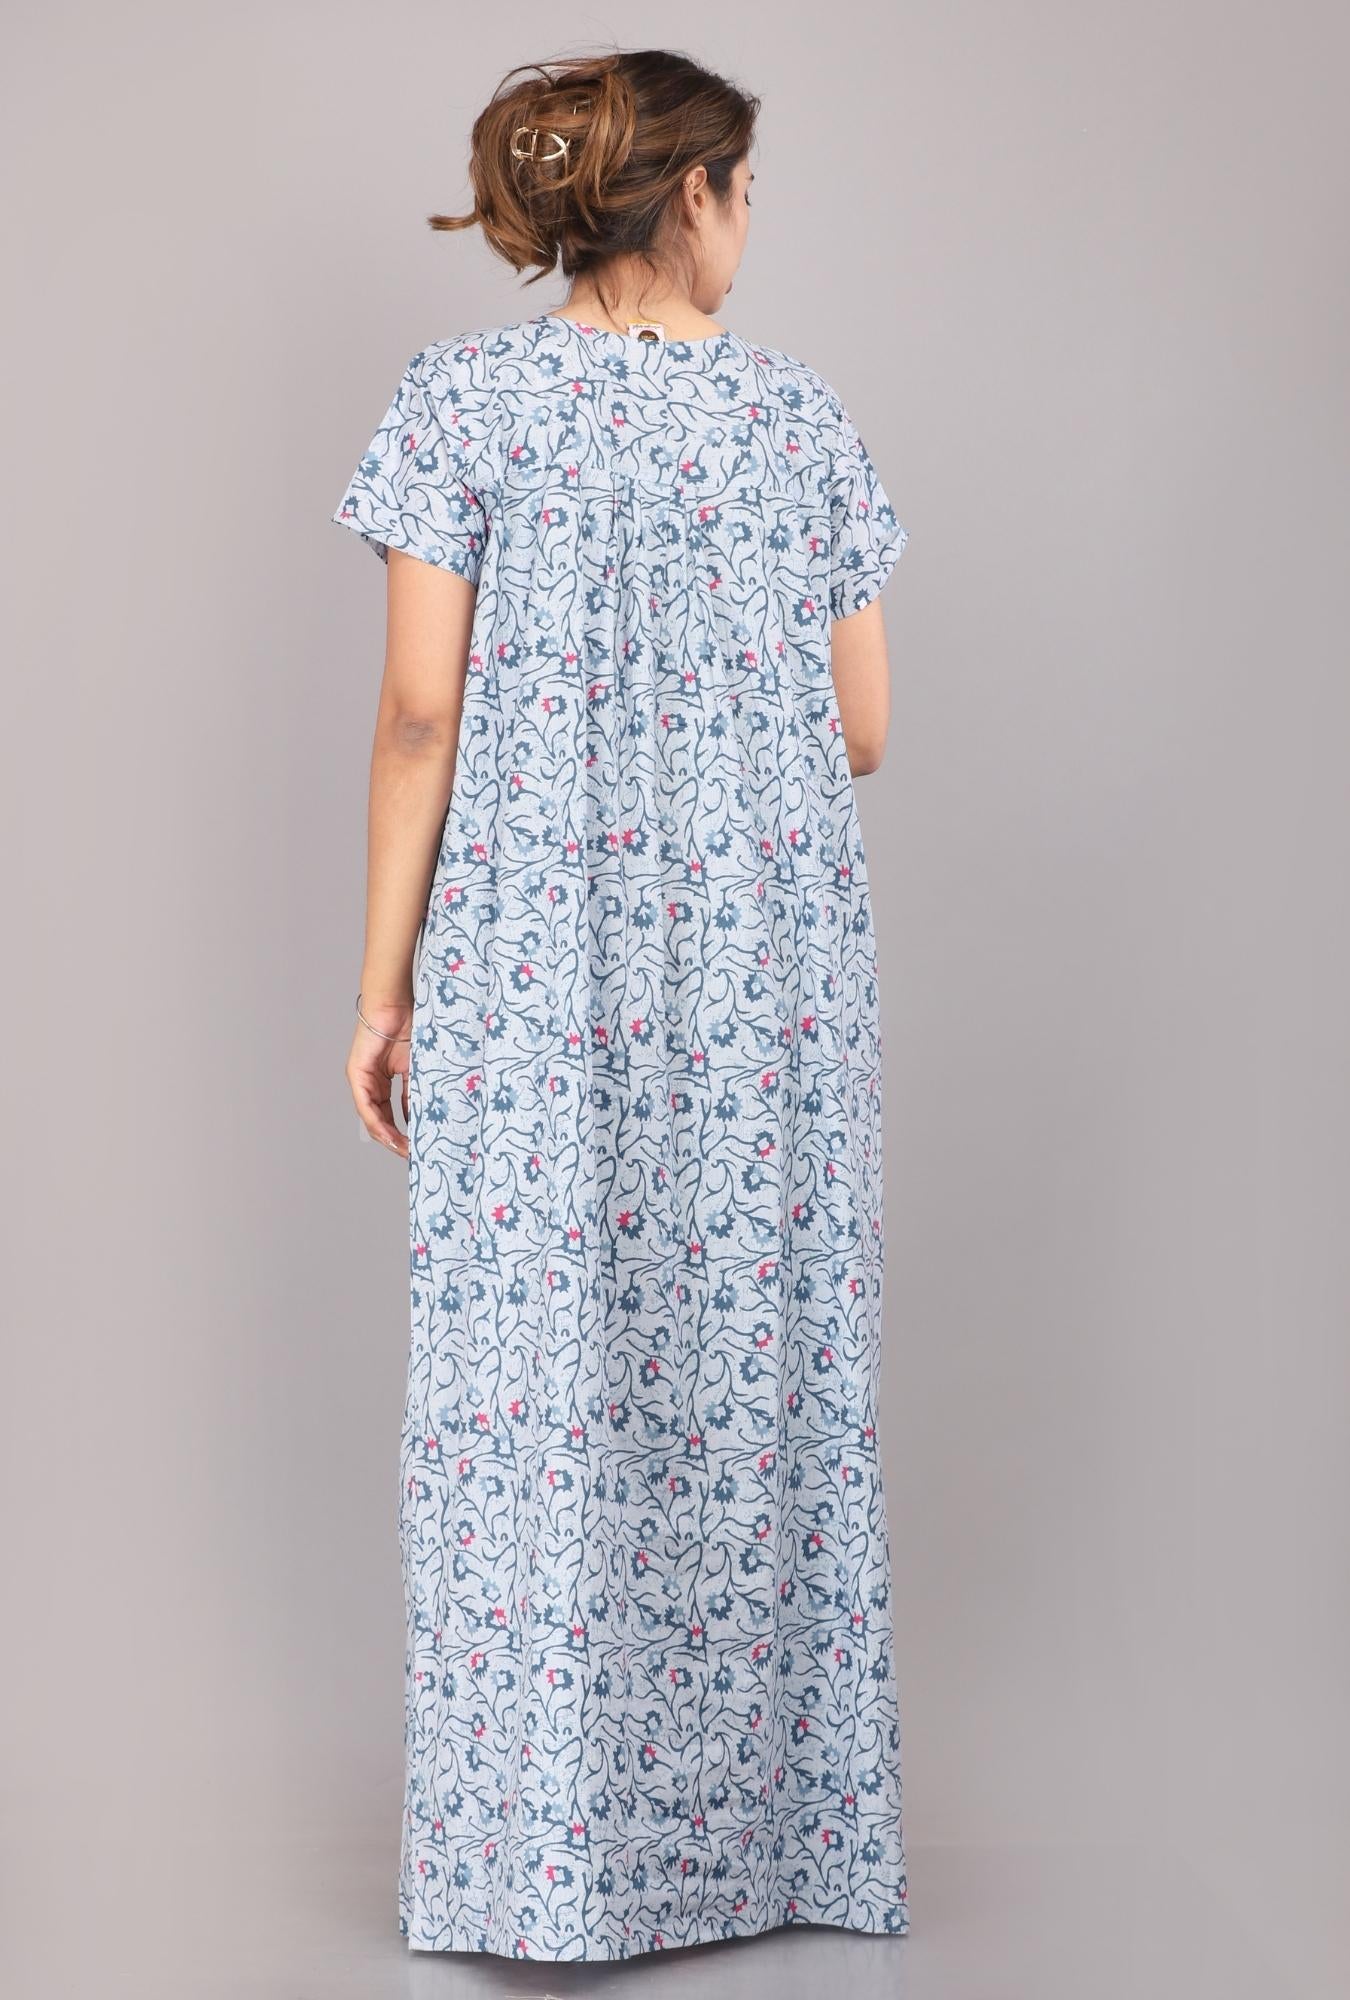 Two Tone Flower Blue Cotton Printed Nightwear Gowns